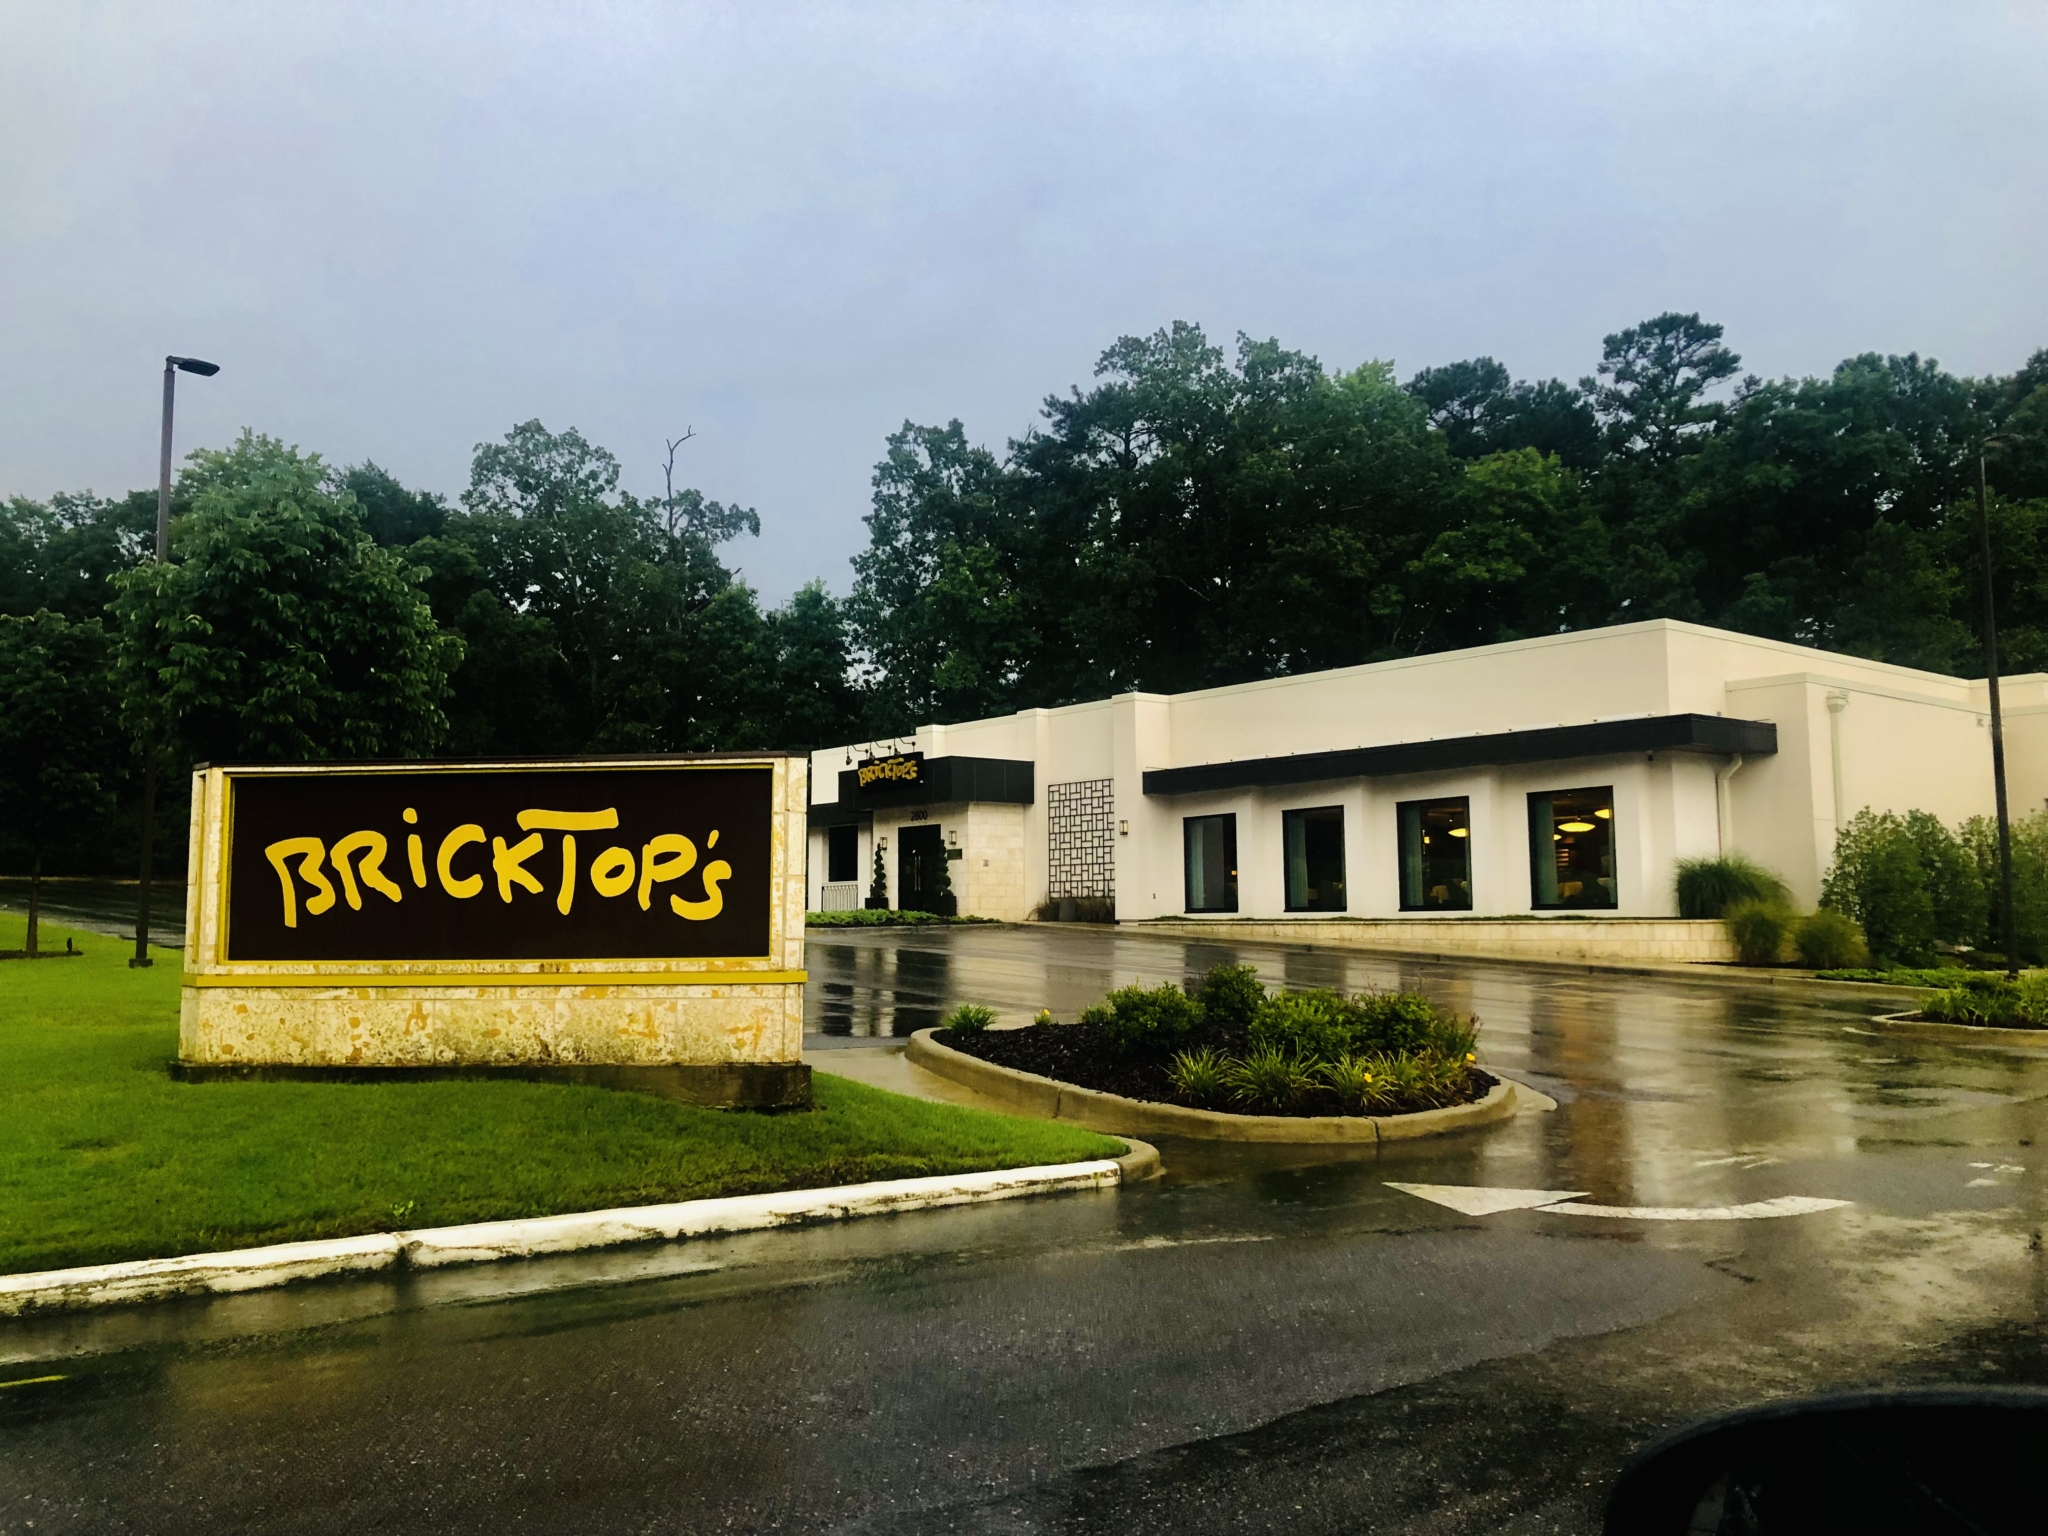 New hotel slated for former Mountain Brook Inn site adjacent to BrickTop’s